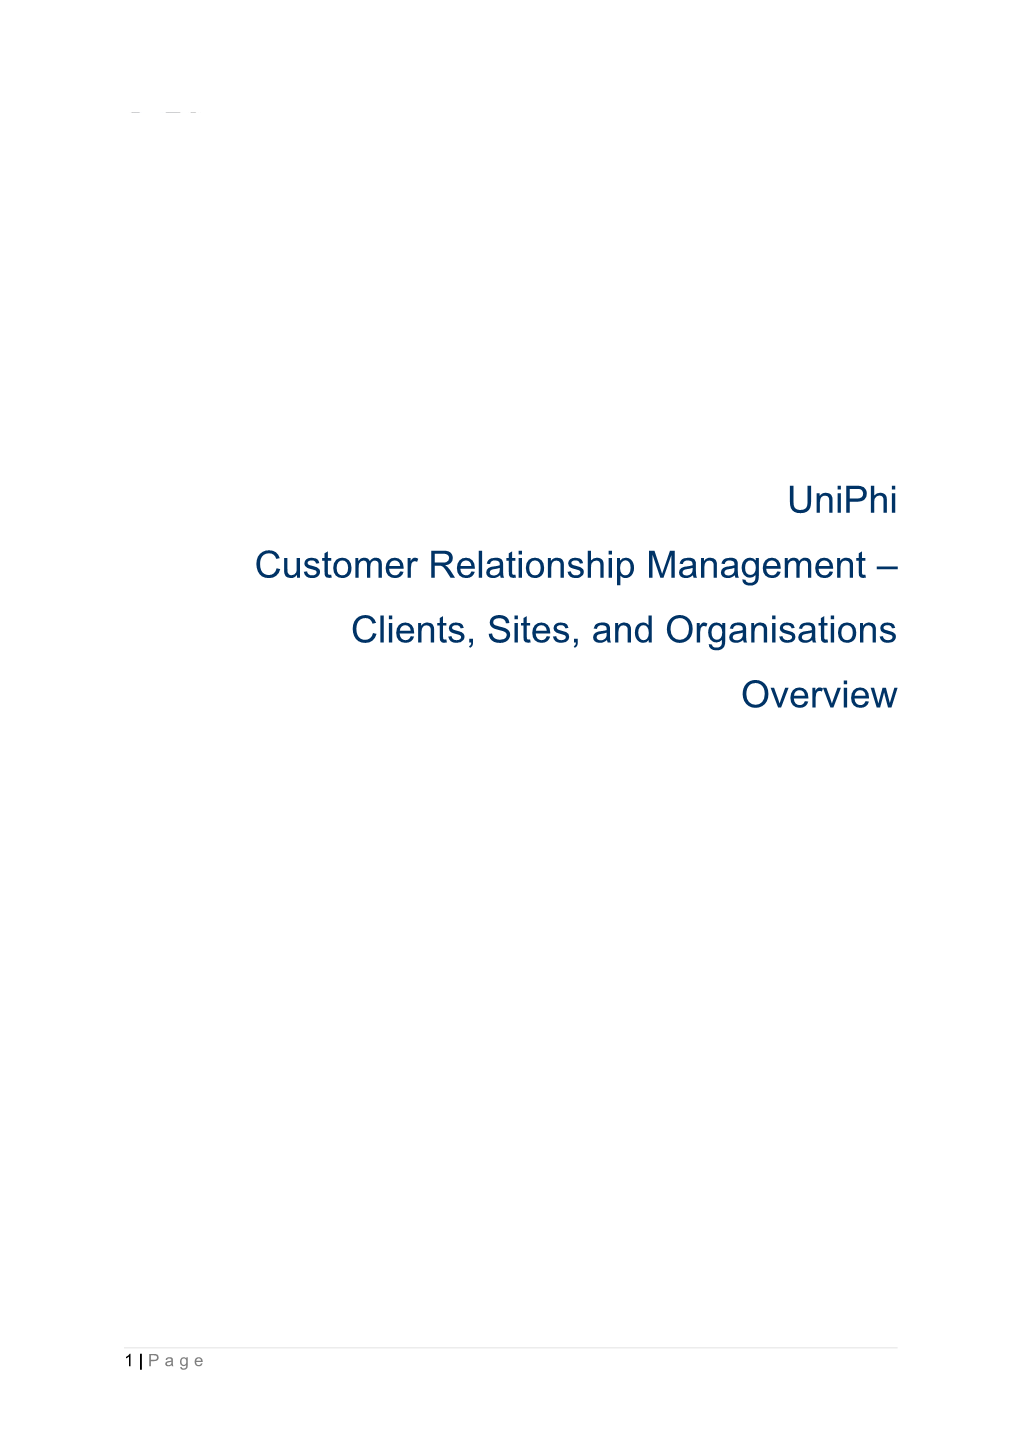 Customer Relationship Management Clients, Sites, and Organisations